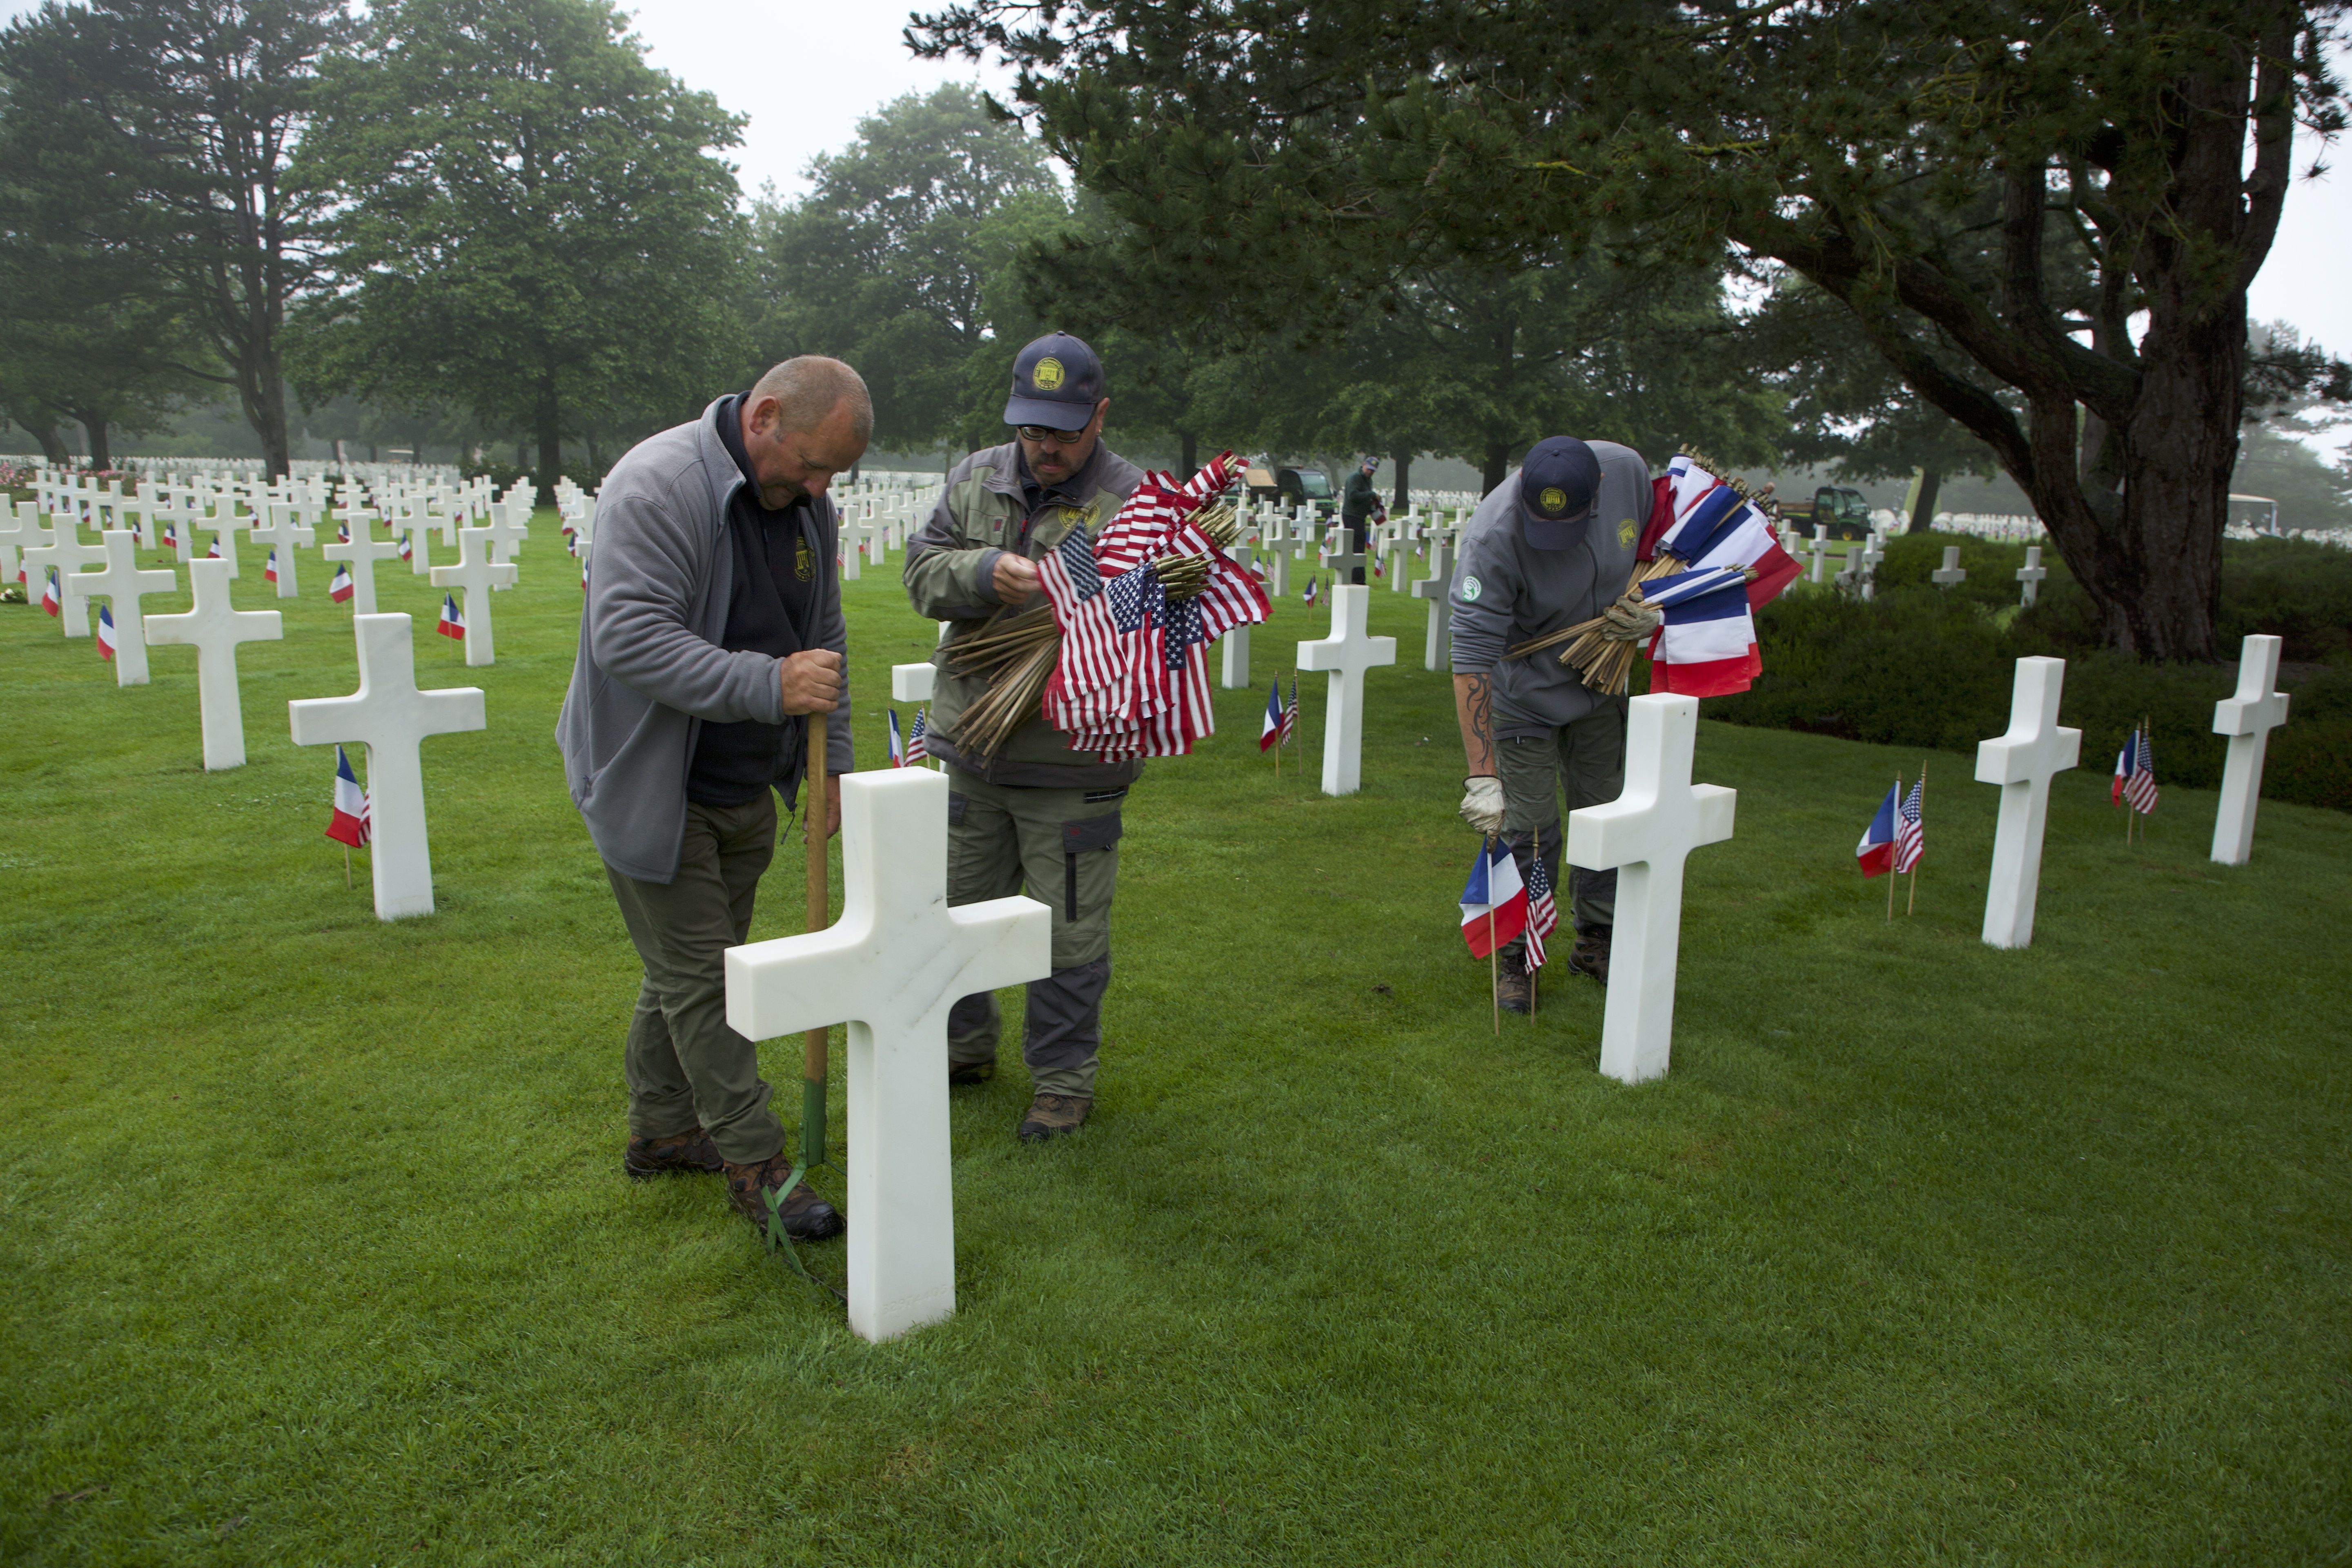 ABMC staff at the Normandy American Cemetery prepare for the 78th D-Day anniversary.